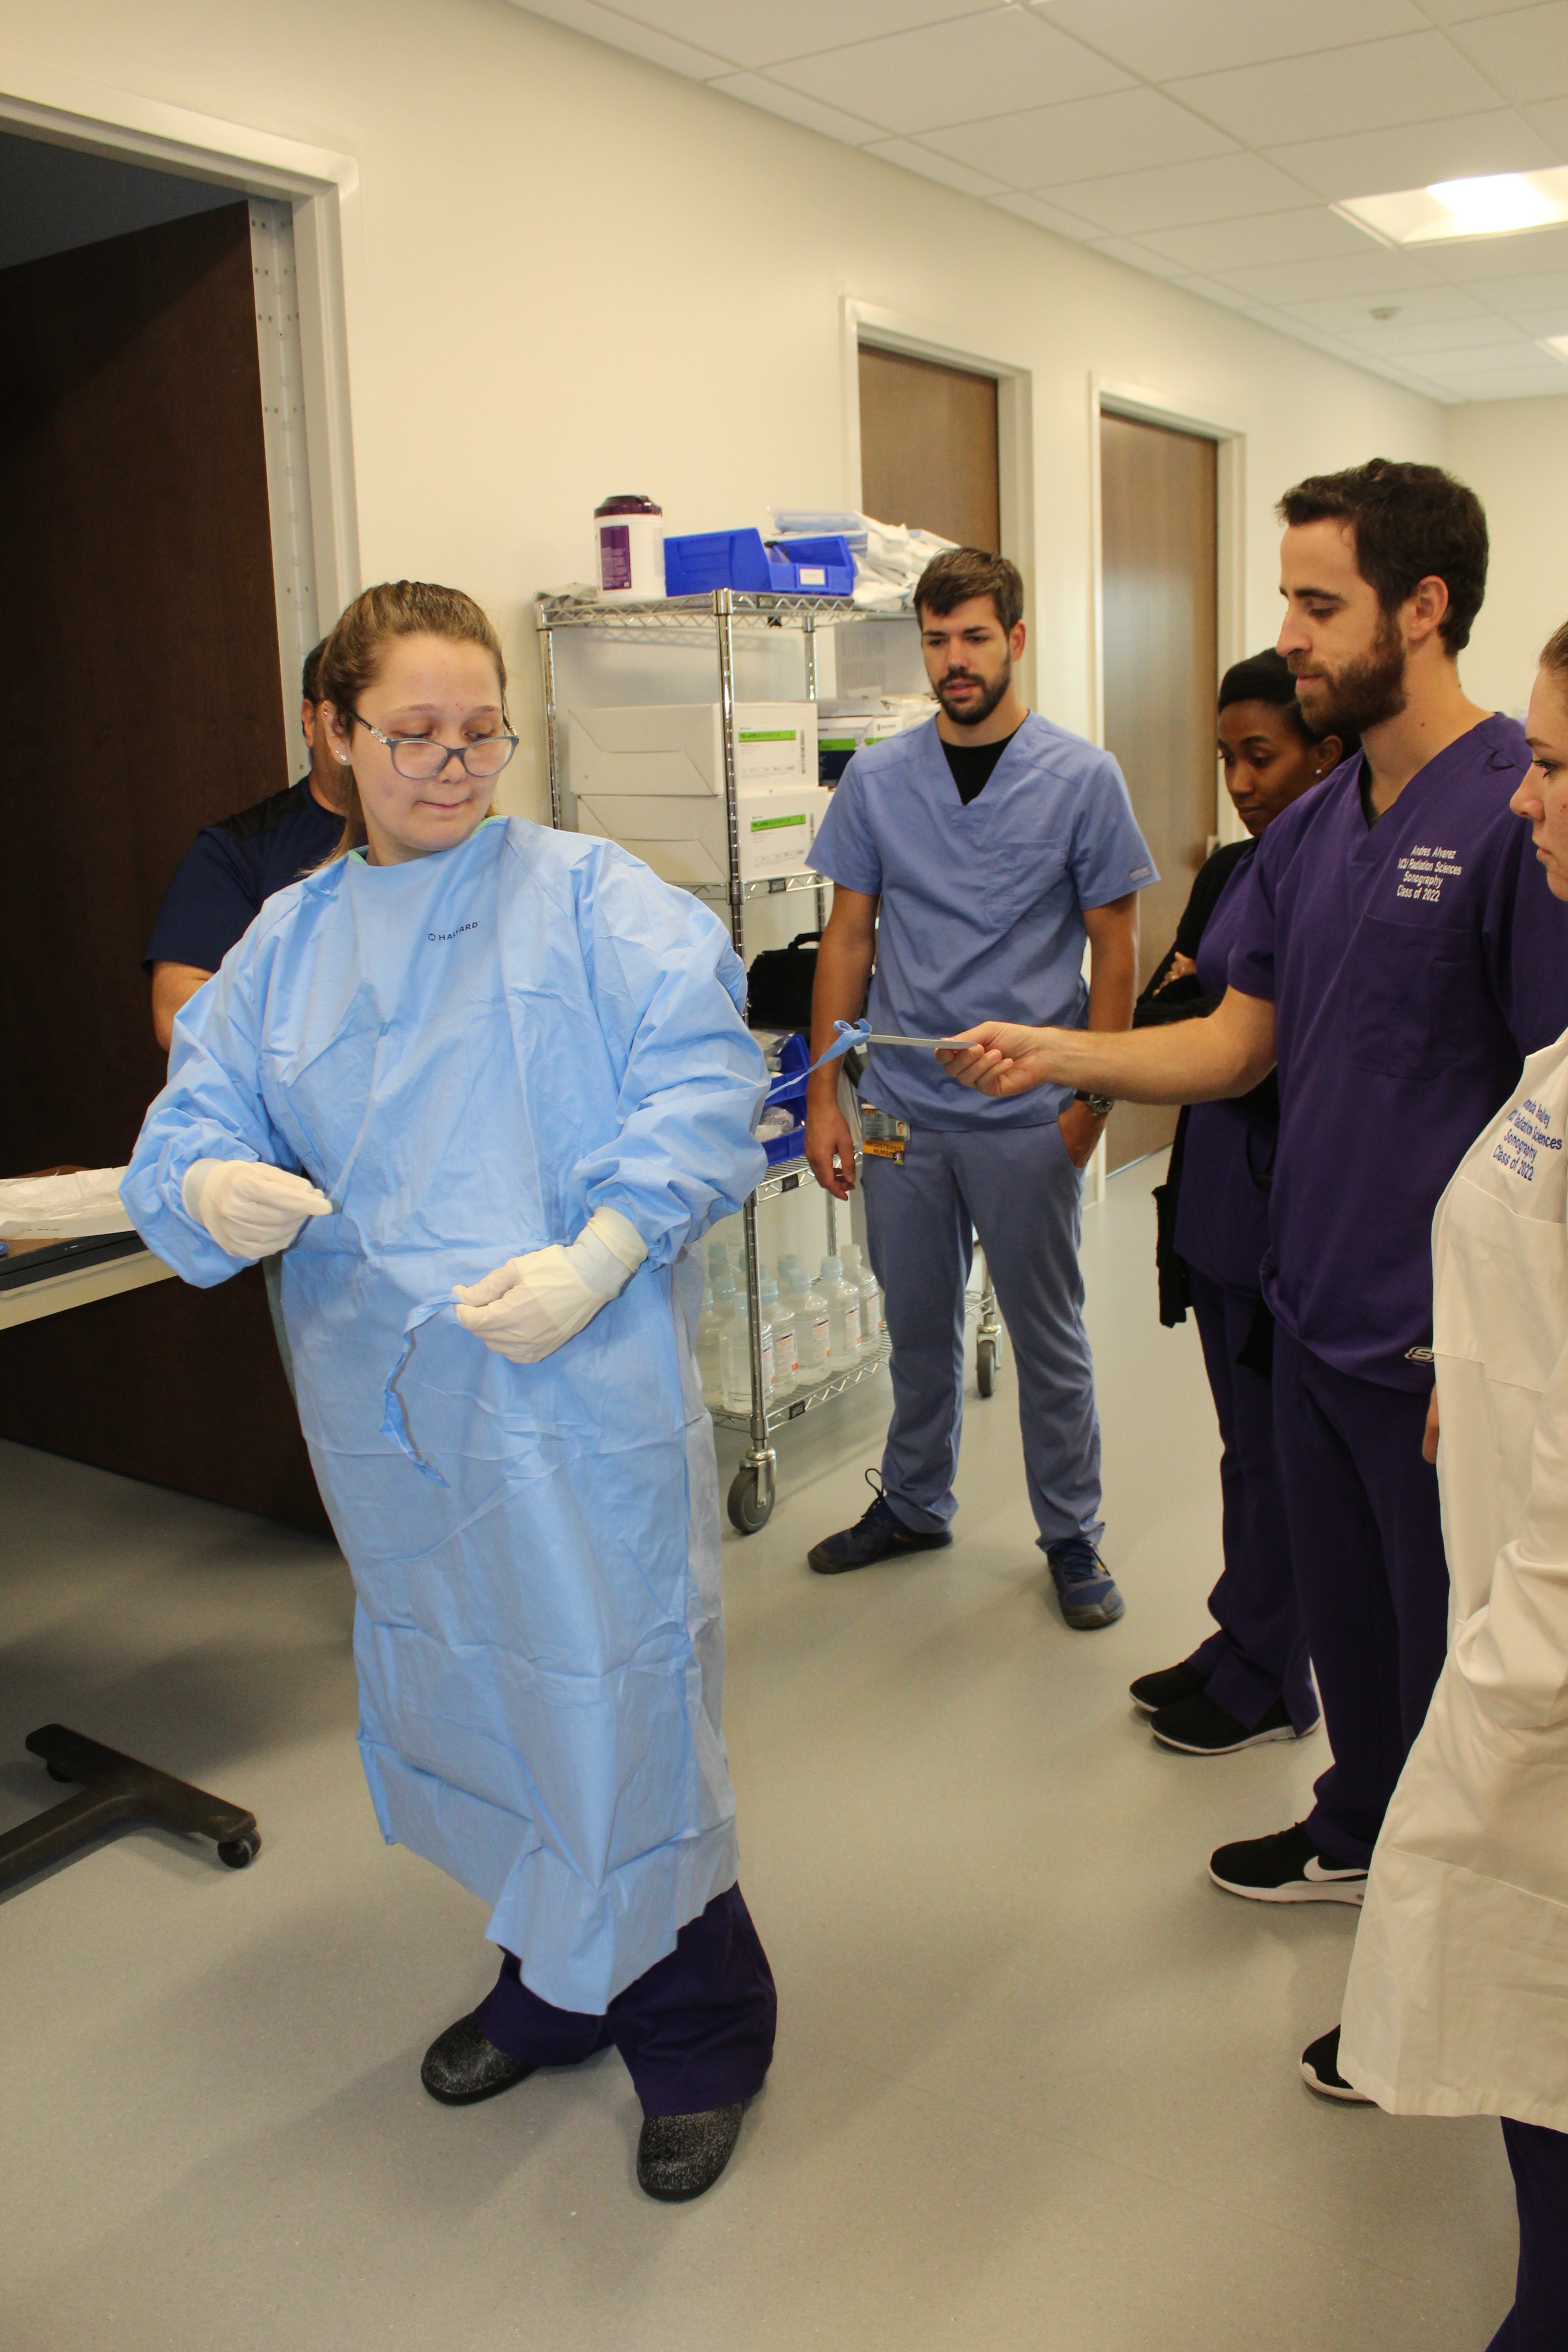 Students gather to watch how to put on a surgical gown